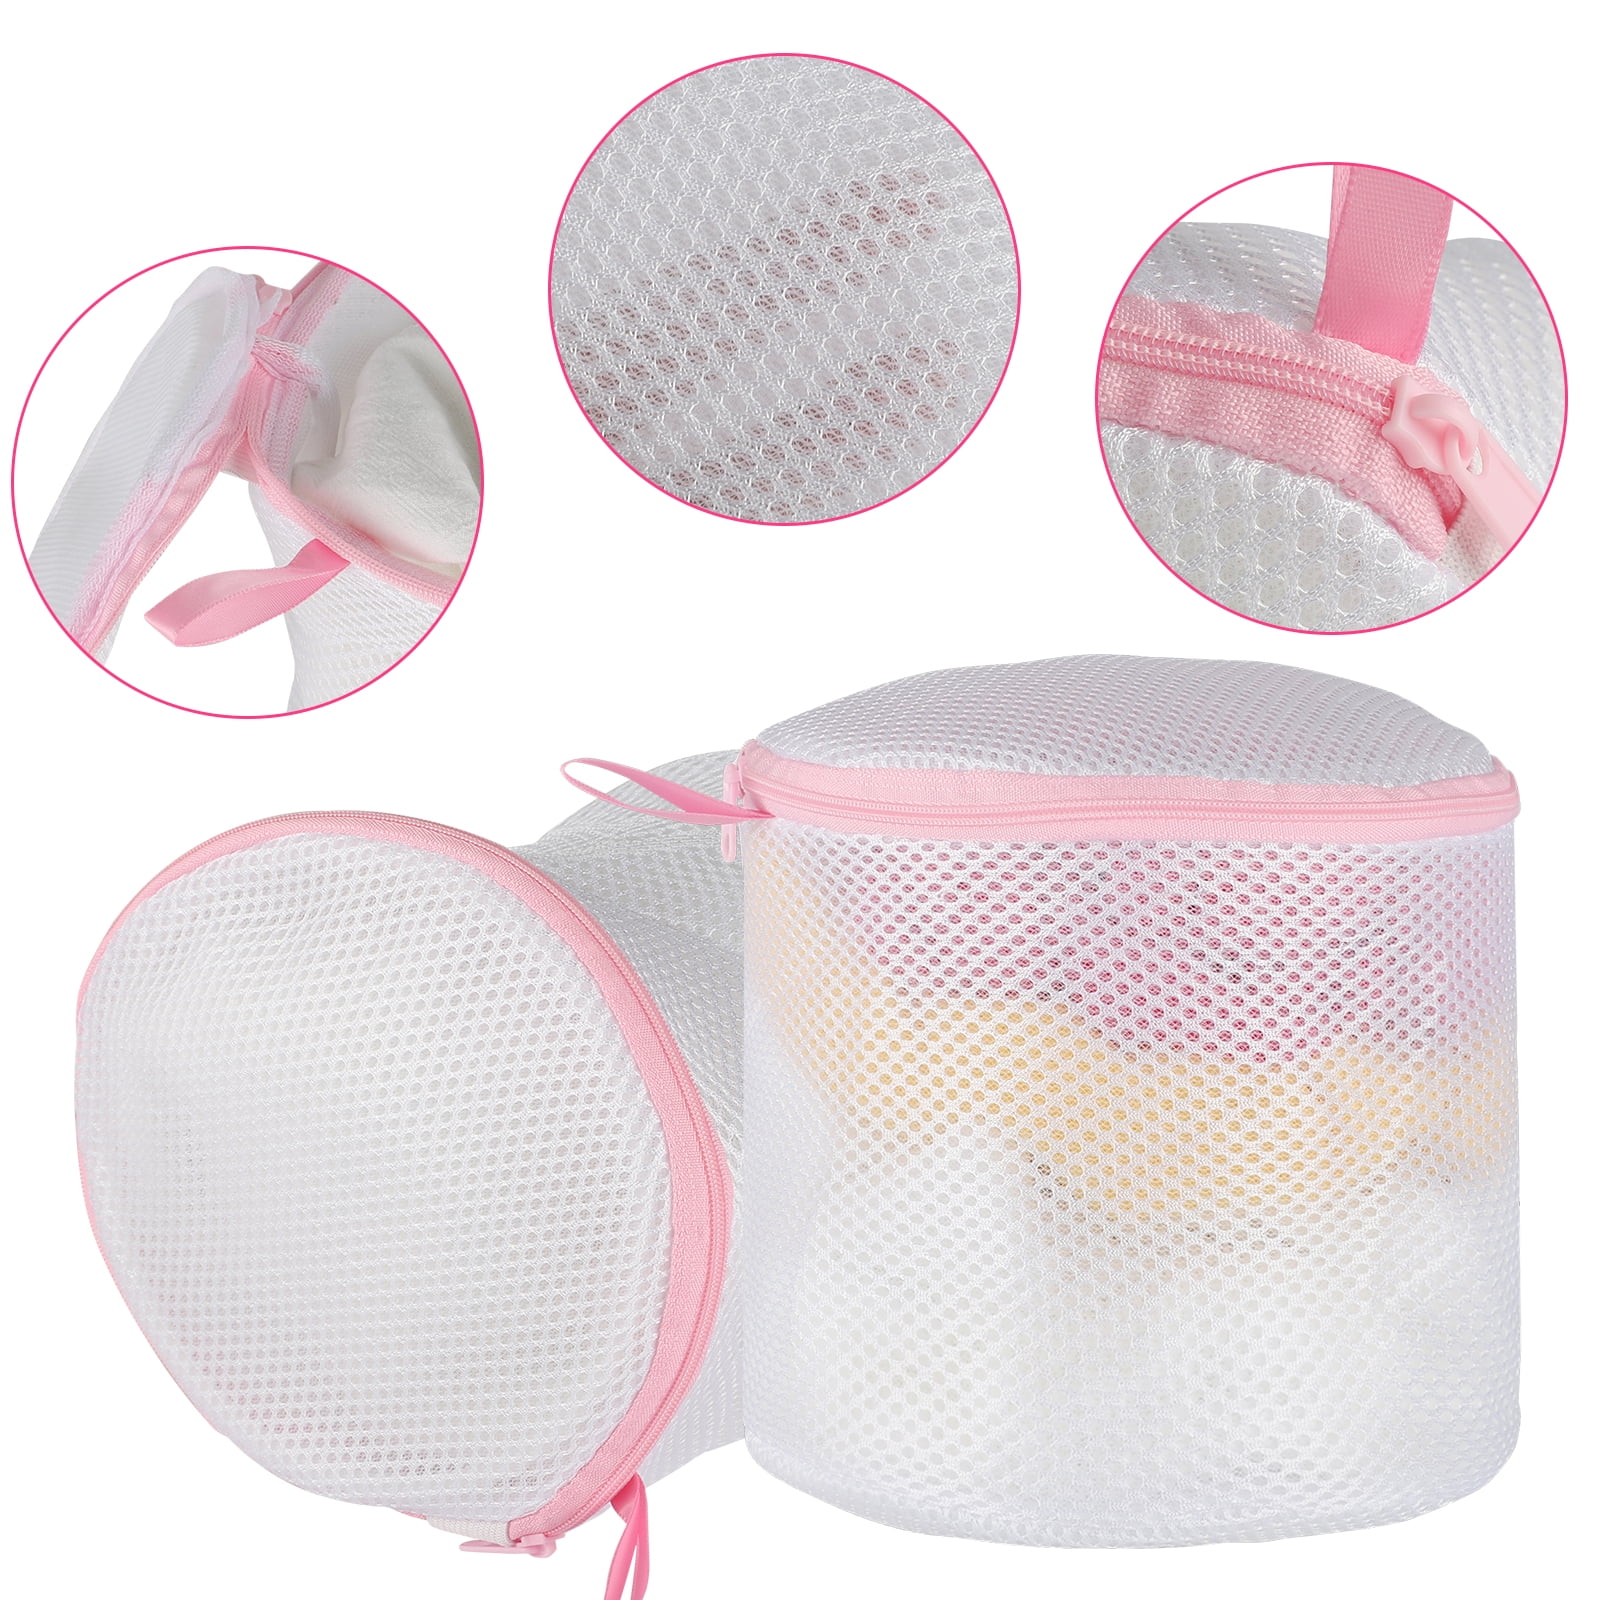 Plusmart Bra Laundry Bag, Mesh Laundry Bag for Delicates, Bra Washing Bag for D to G Cup, 3 Pack